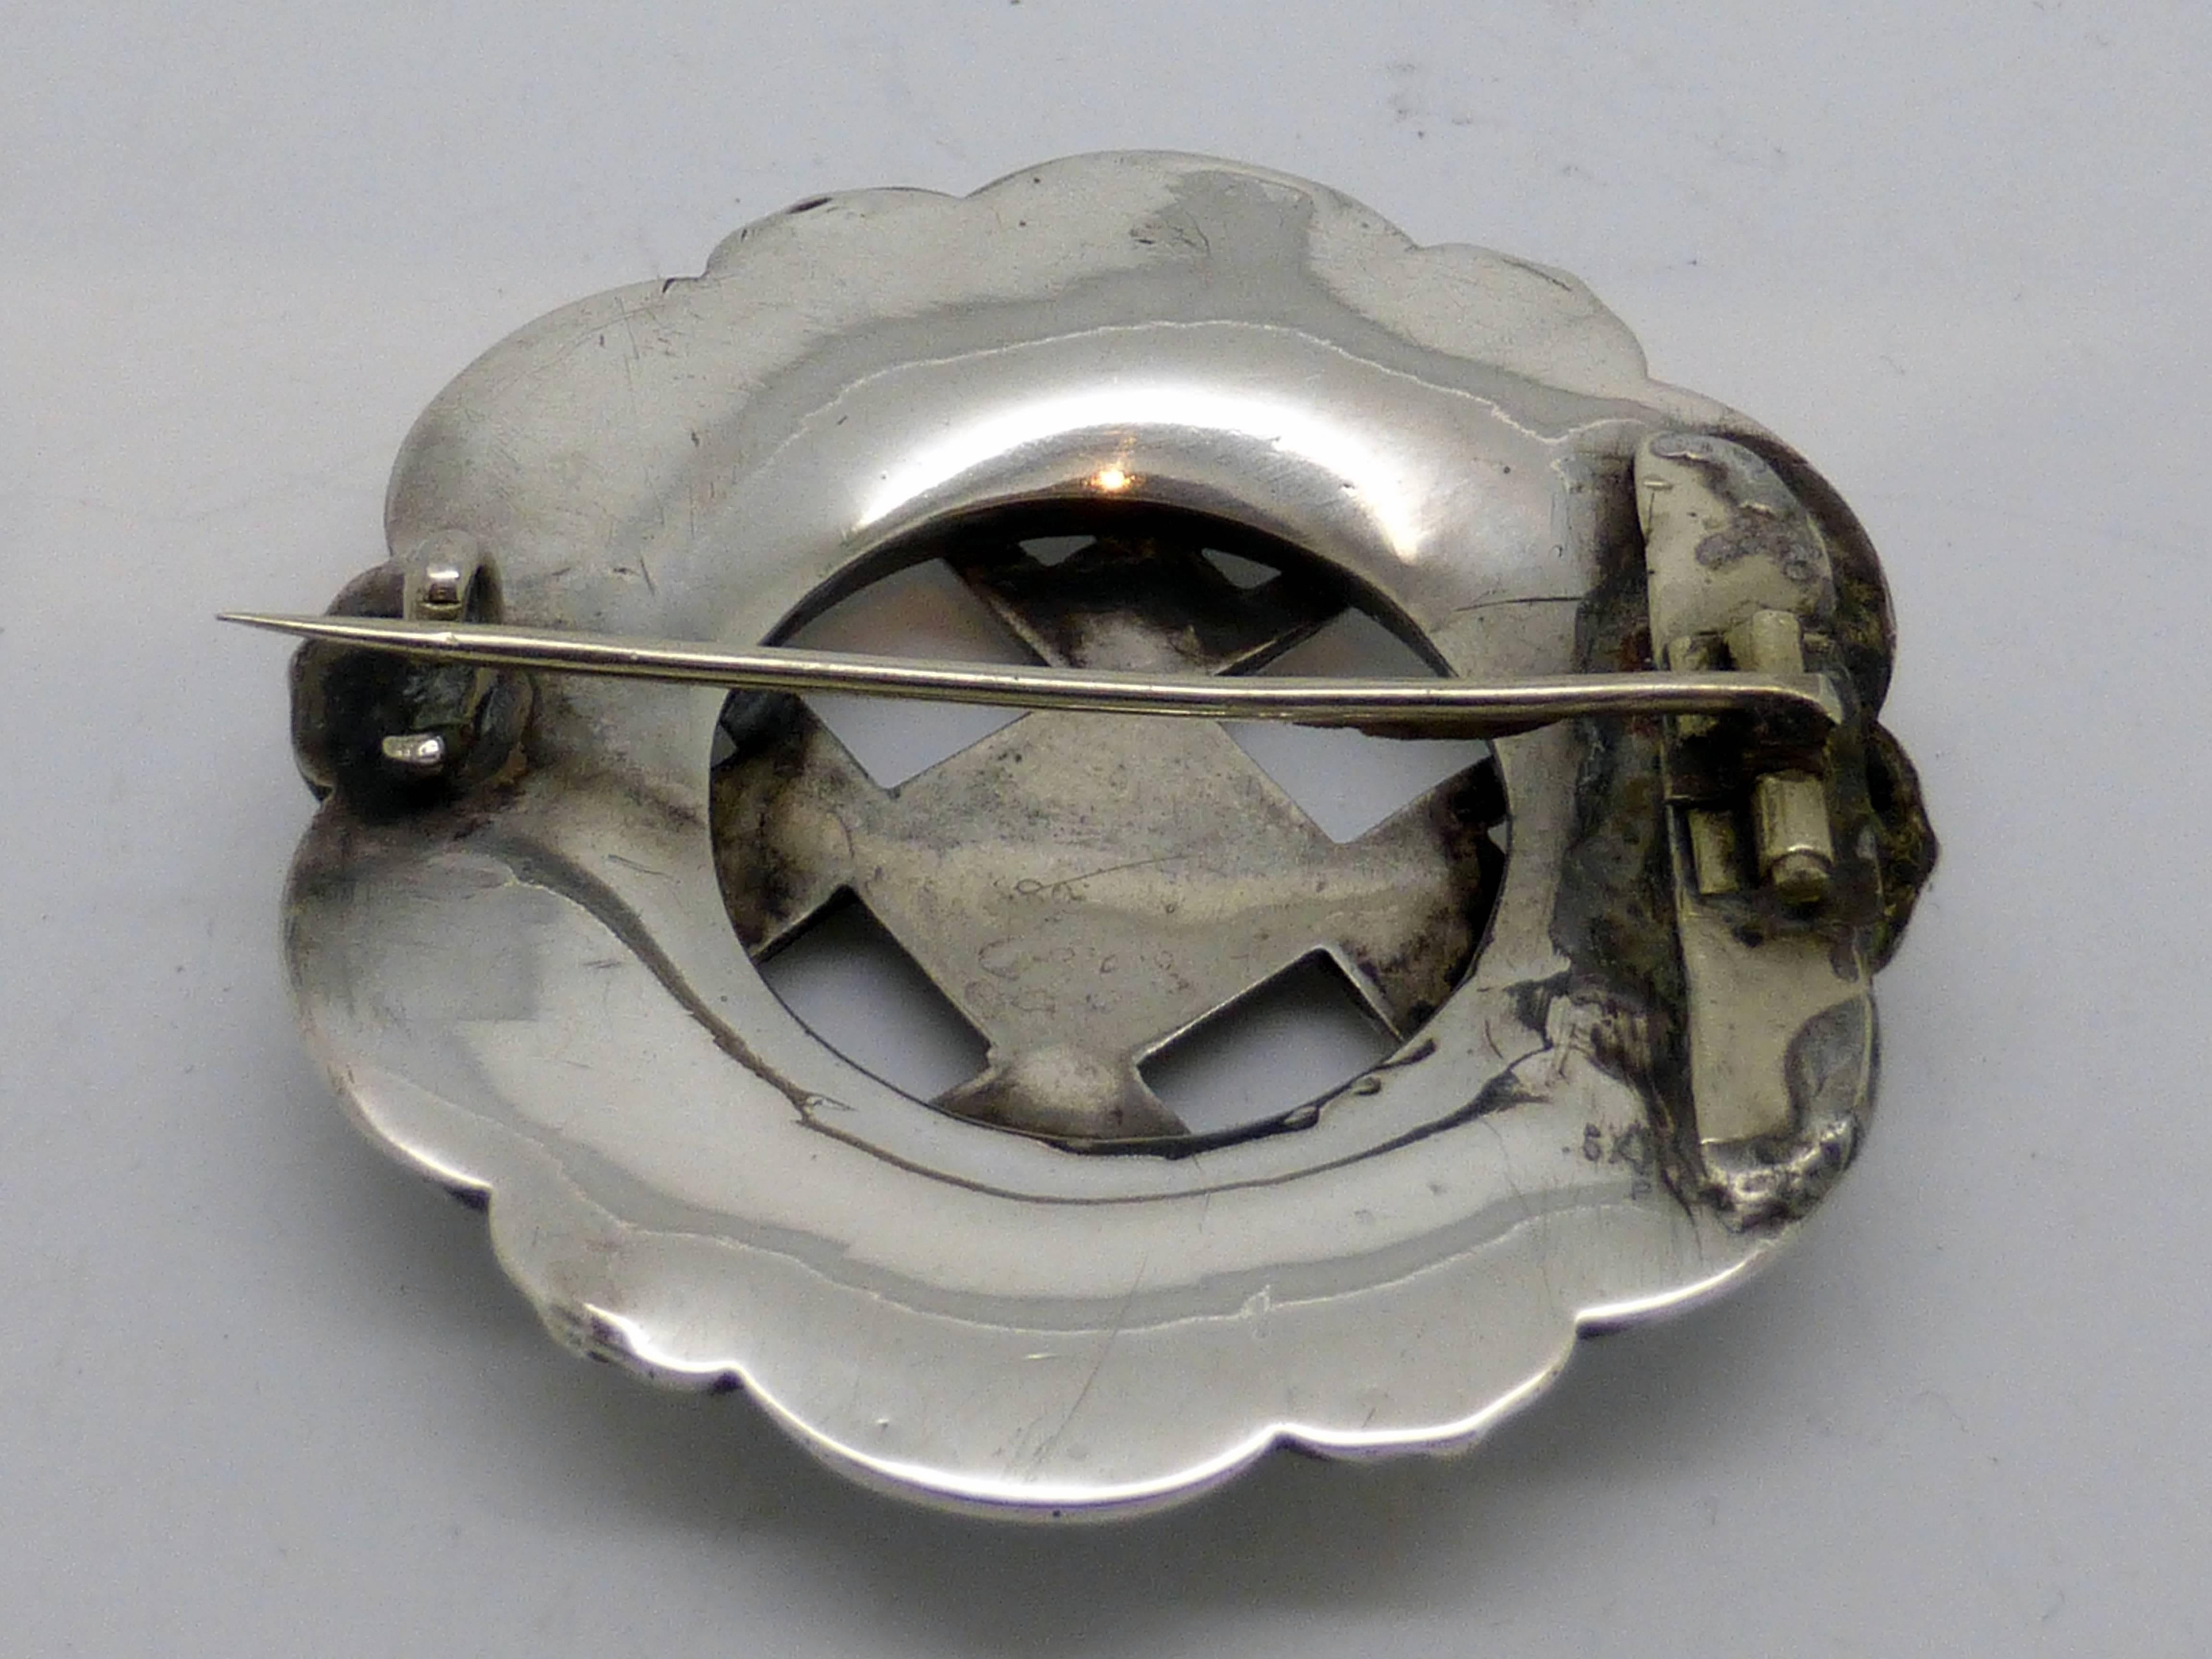 Victorian, sterling silver - mounted (unmarked but tested) Scottish agate brooch, Scotland, Ca. 1880's. Openings in center of brooch allow fabric to show through. Lovely etched work on sterling silver mount. @1 3/4